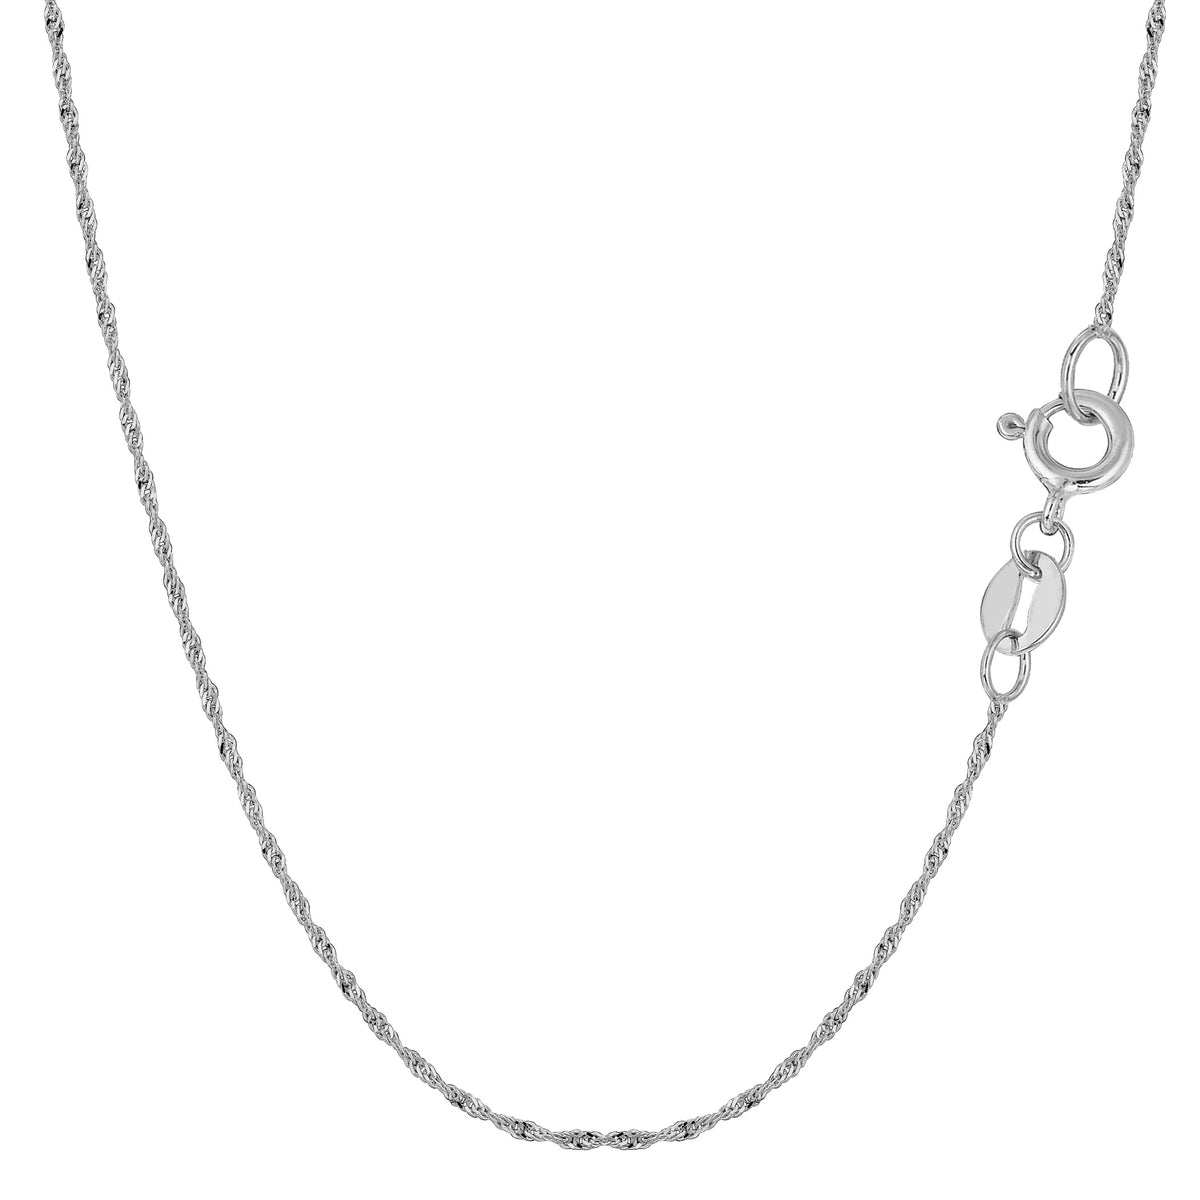 10k White Gold Singapore Chain Necklace, 1.0mm fine designer jewelry for men and women